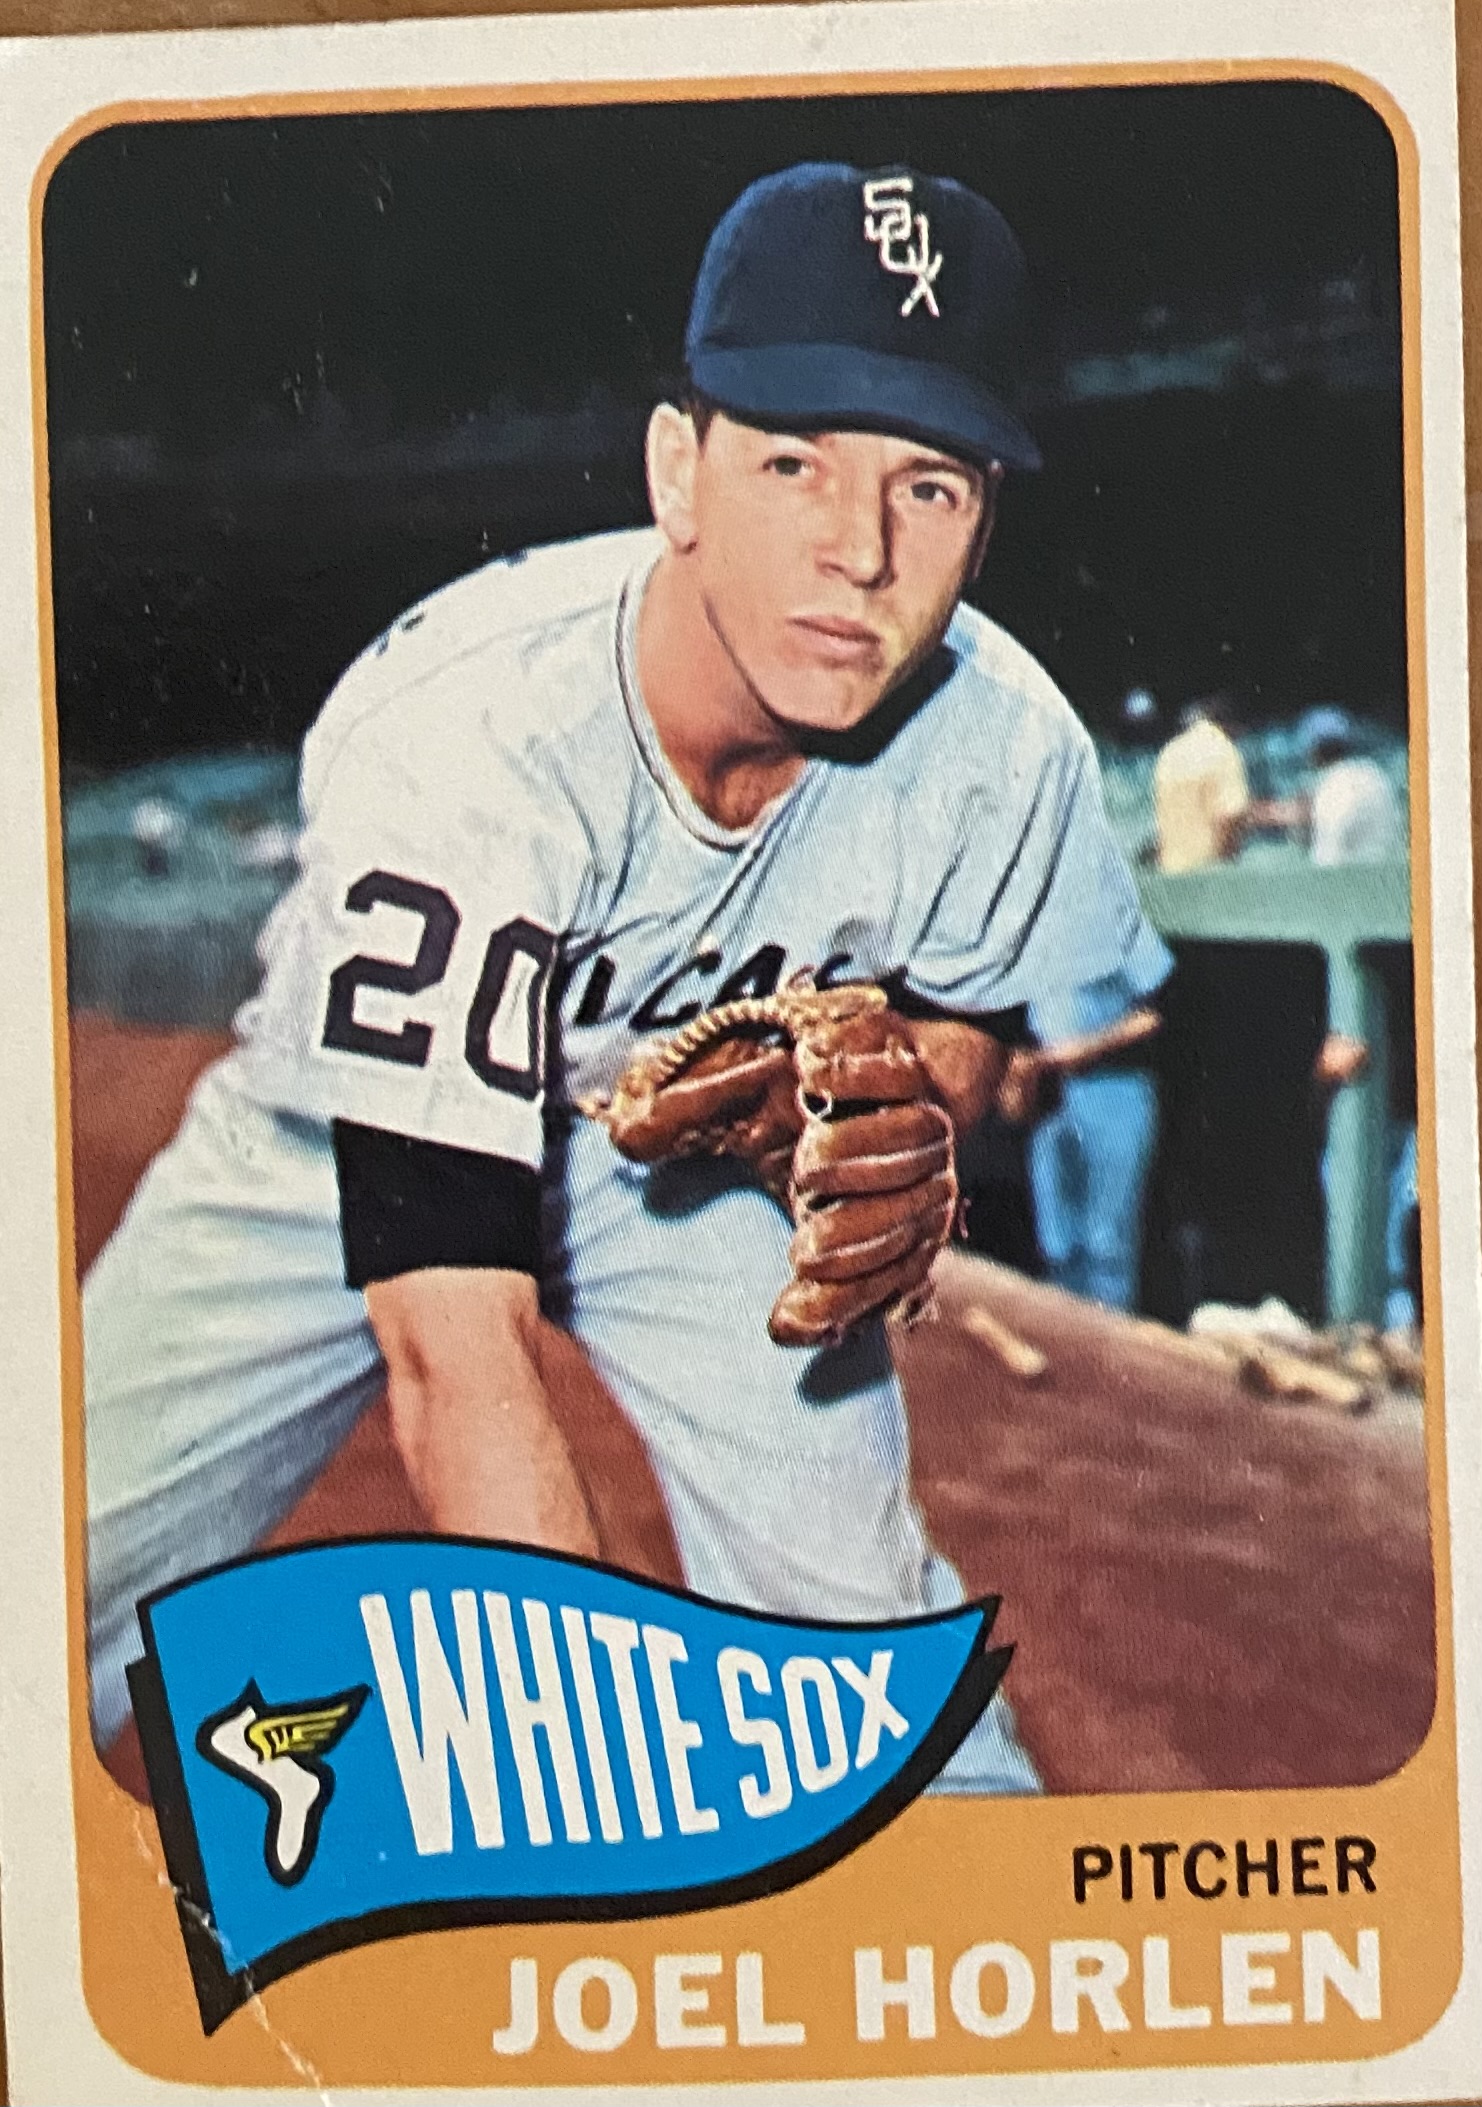 The 1967 AL Pennant Race - Part 24 - Twins take two from White Sox